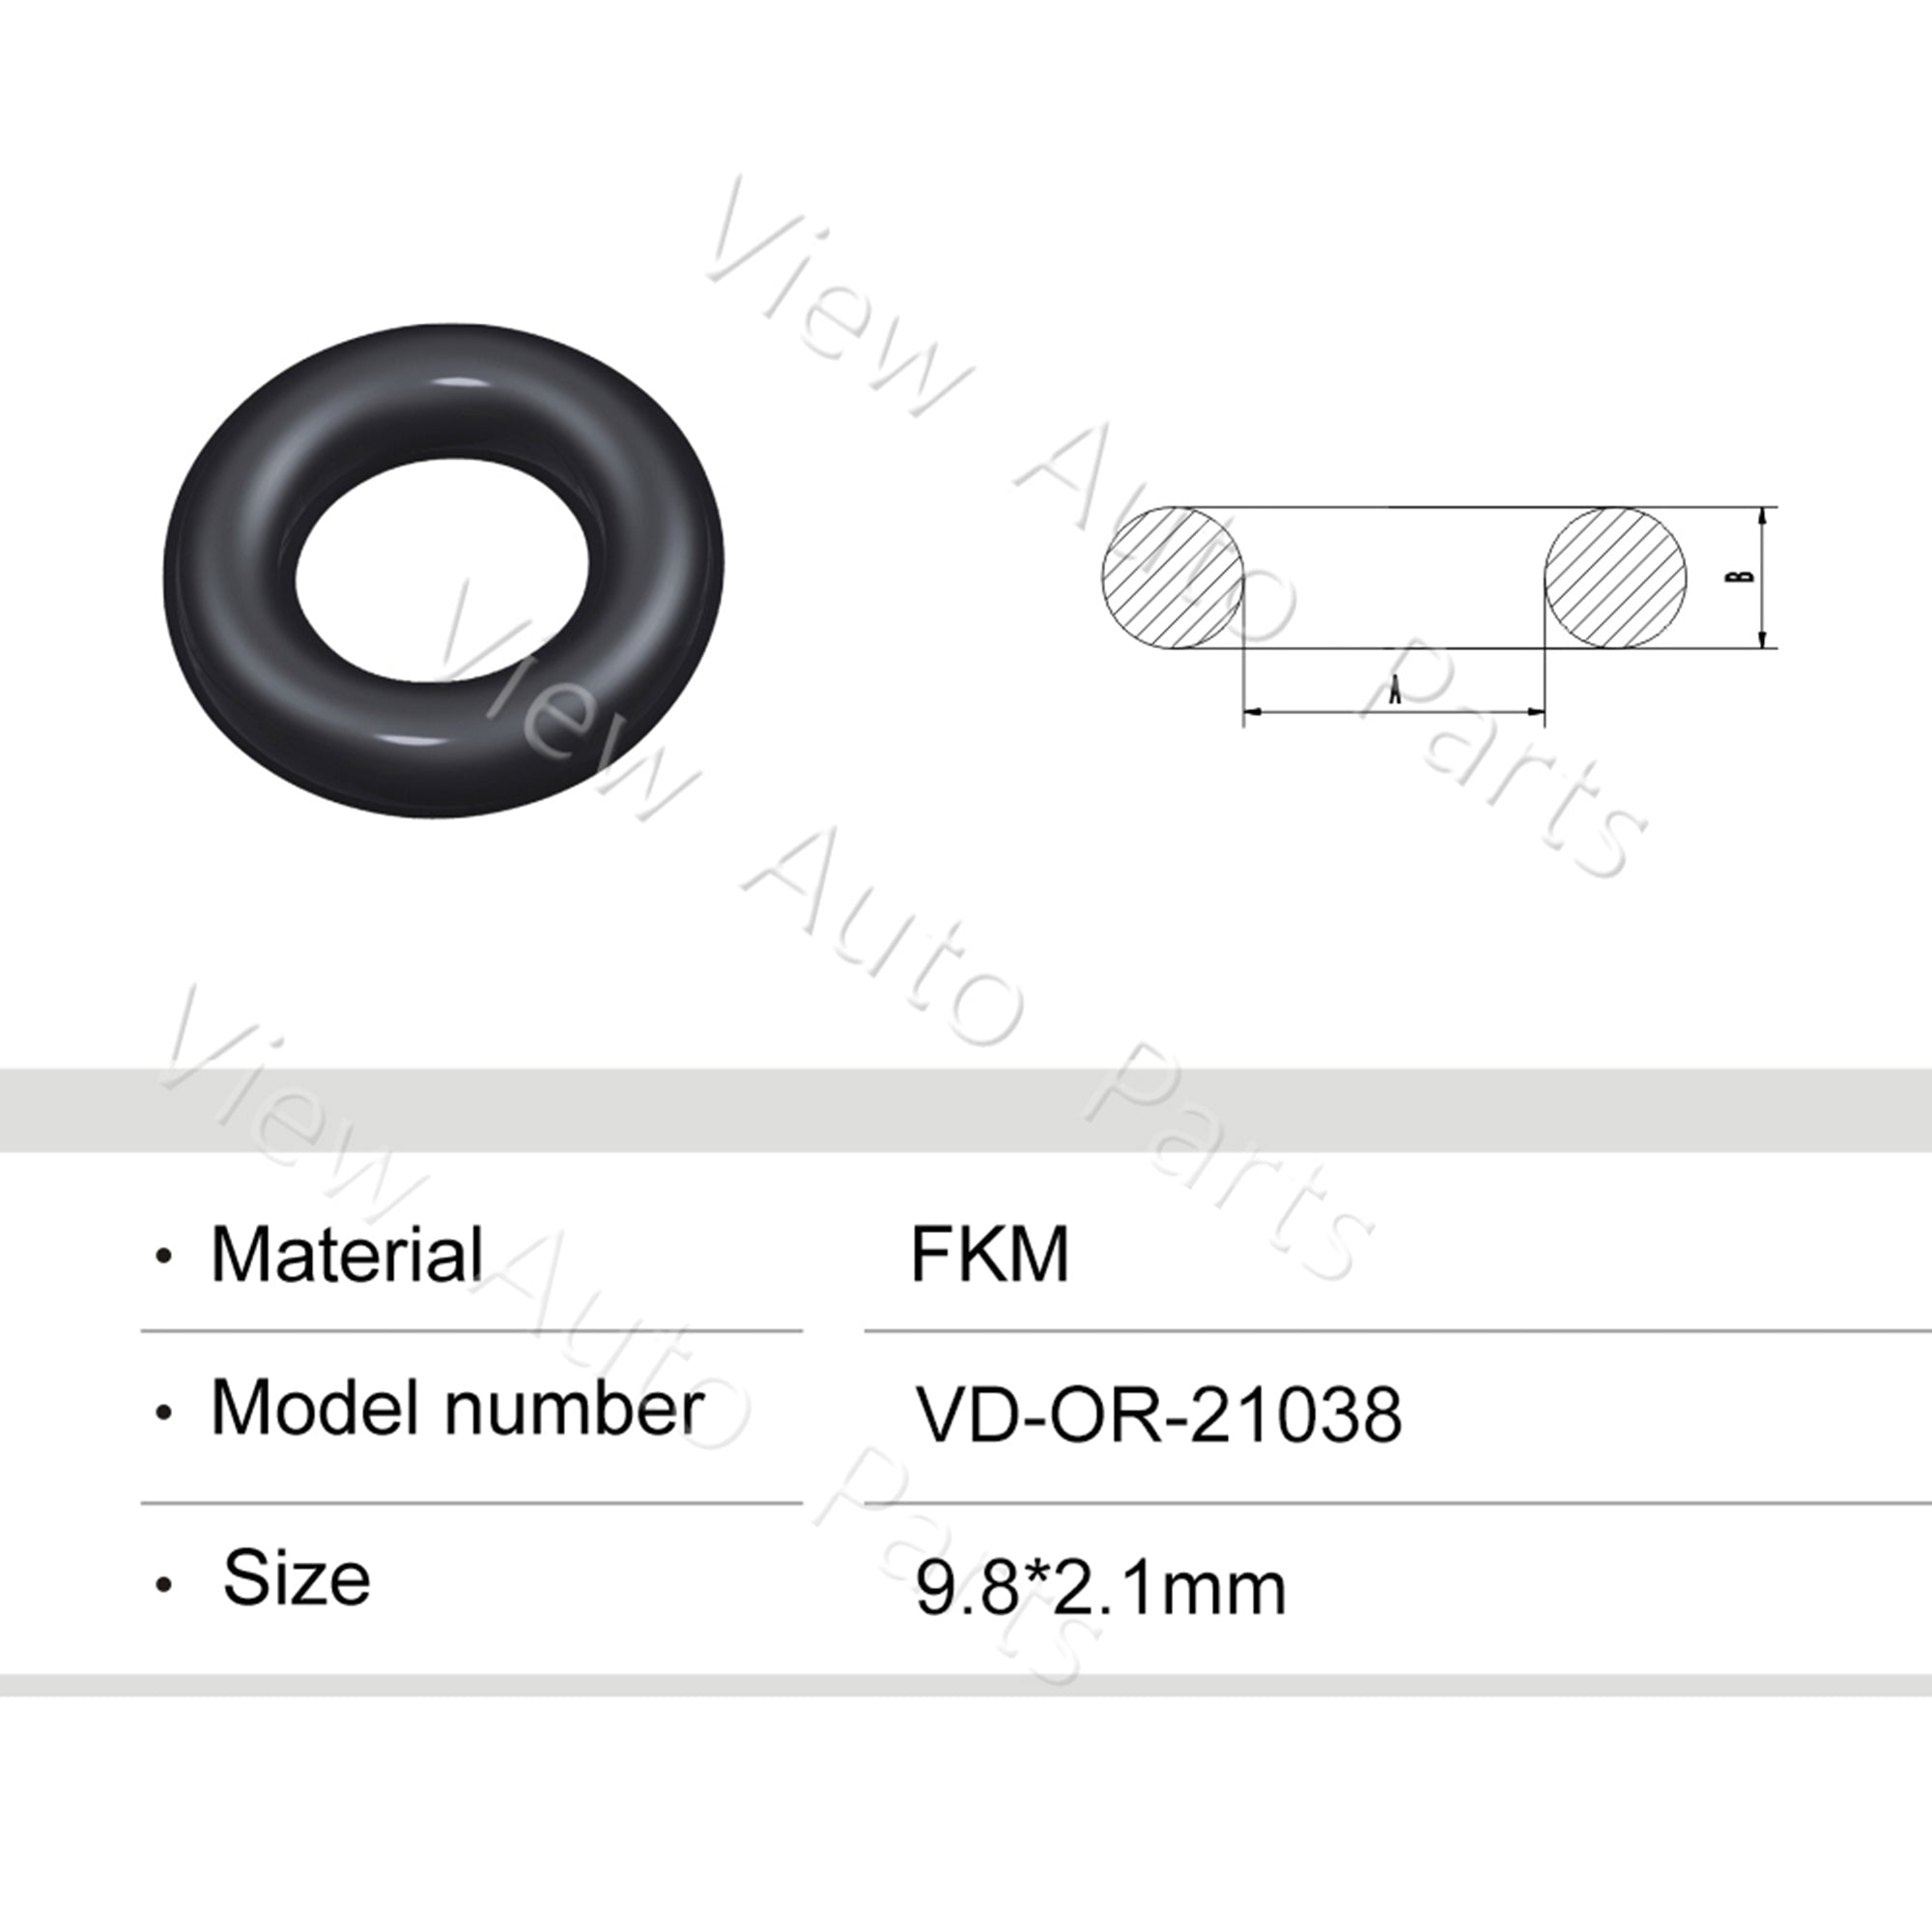 Fuel Injector Rubber Seal Orings for Fuel Injector Repair Kits FKM & Rubber Heat Resistant, Size: 9.8*2.1mm OR-21038